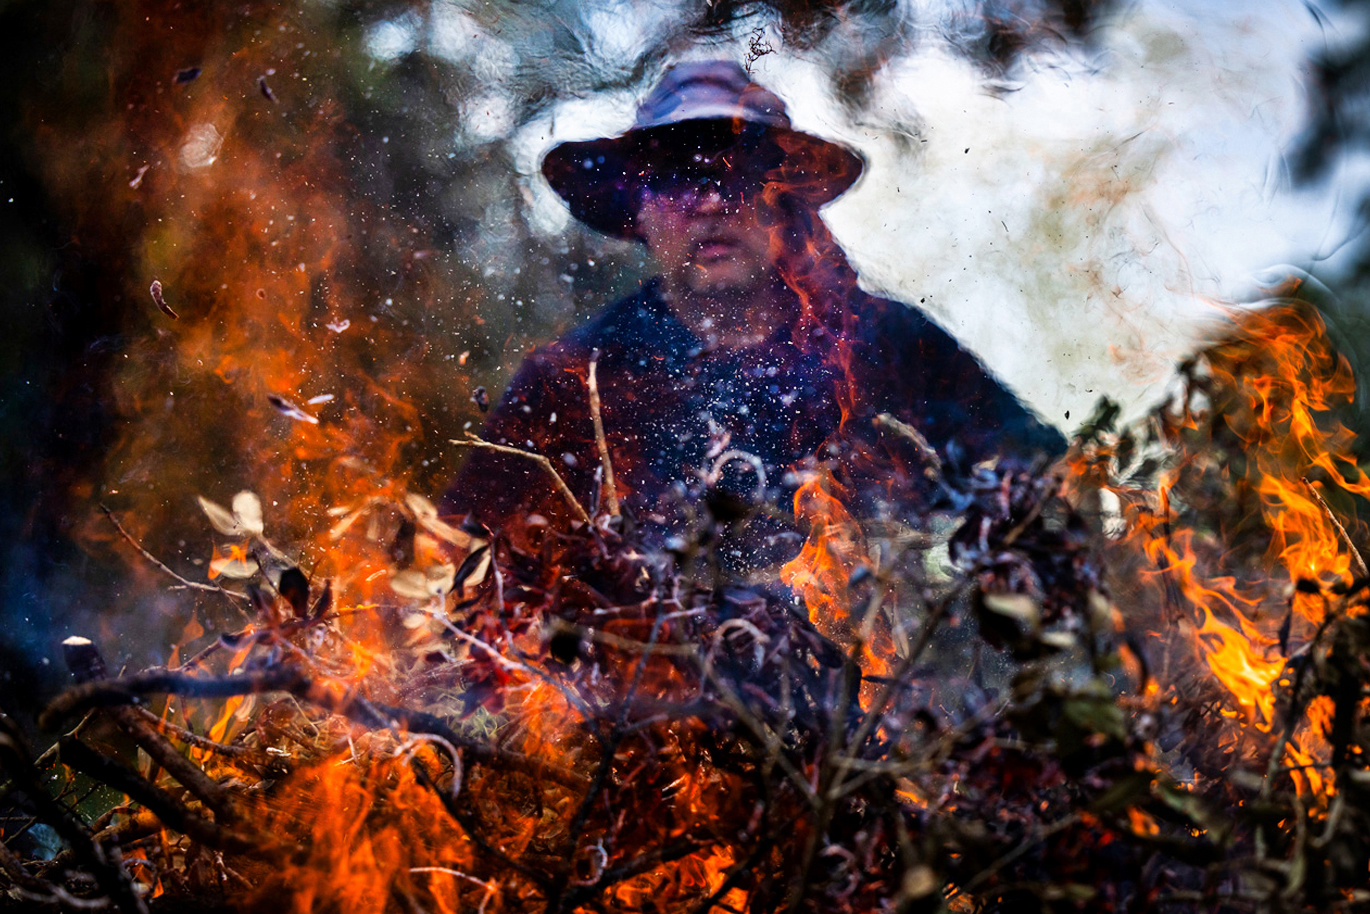 Man looks as Hurricane Beryl debris burns in a fire as he cleans his front yard in Lake Jackson, Texas